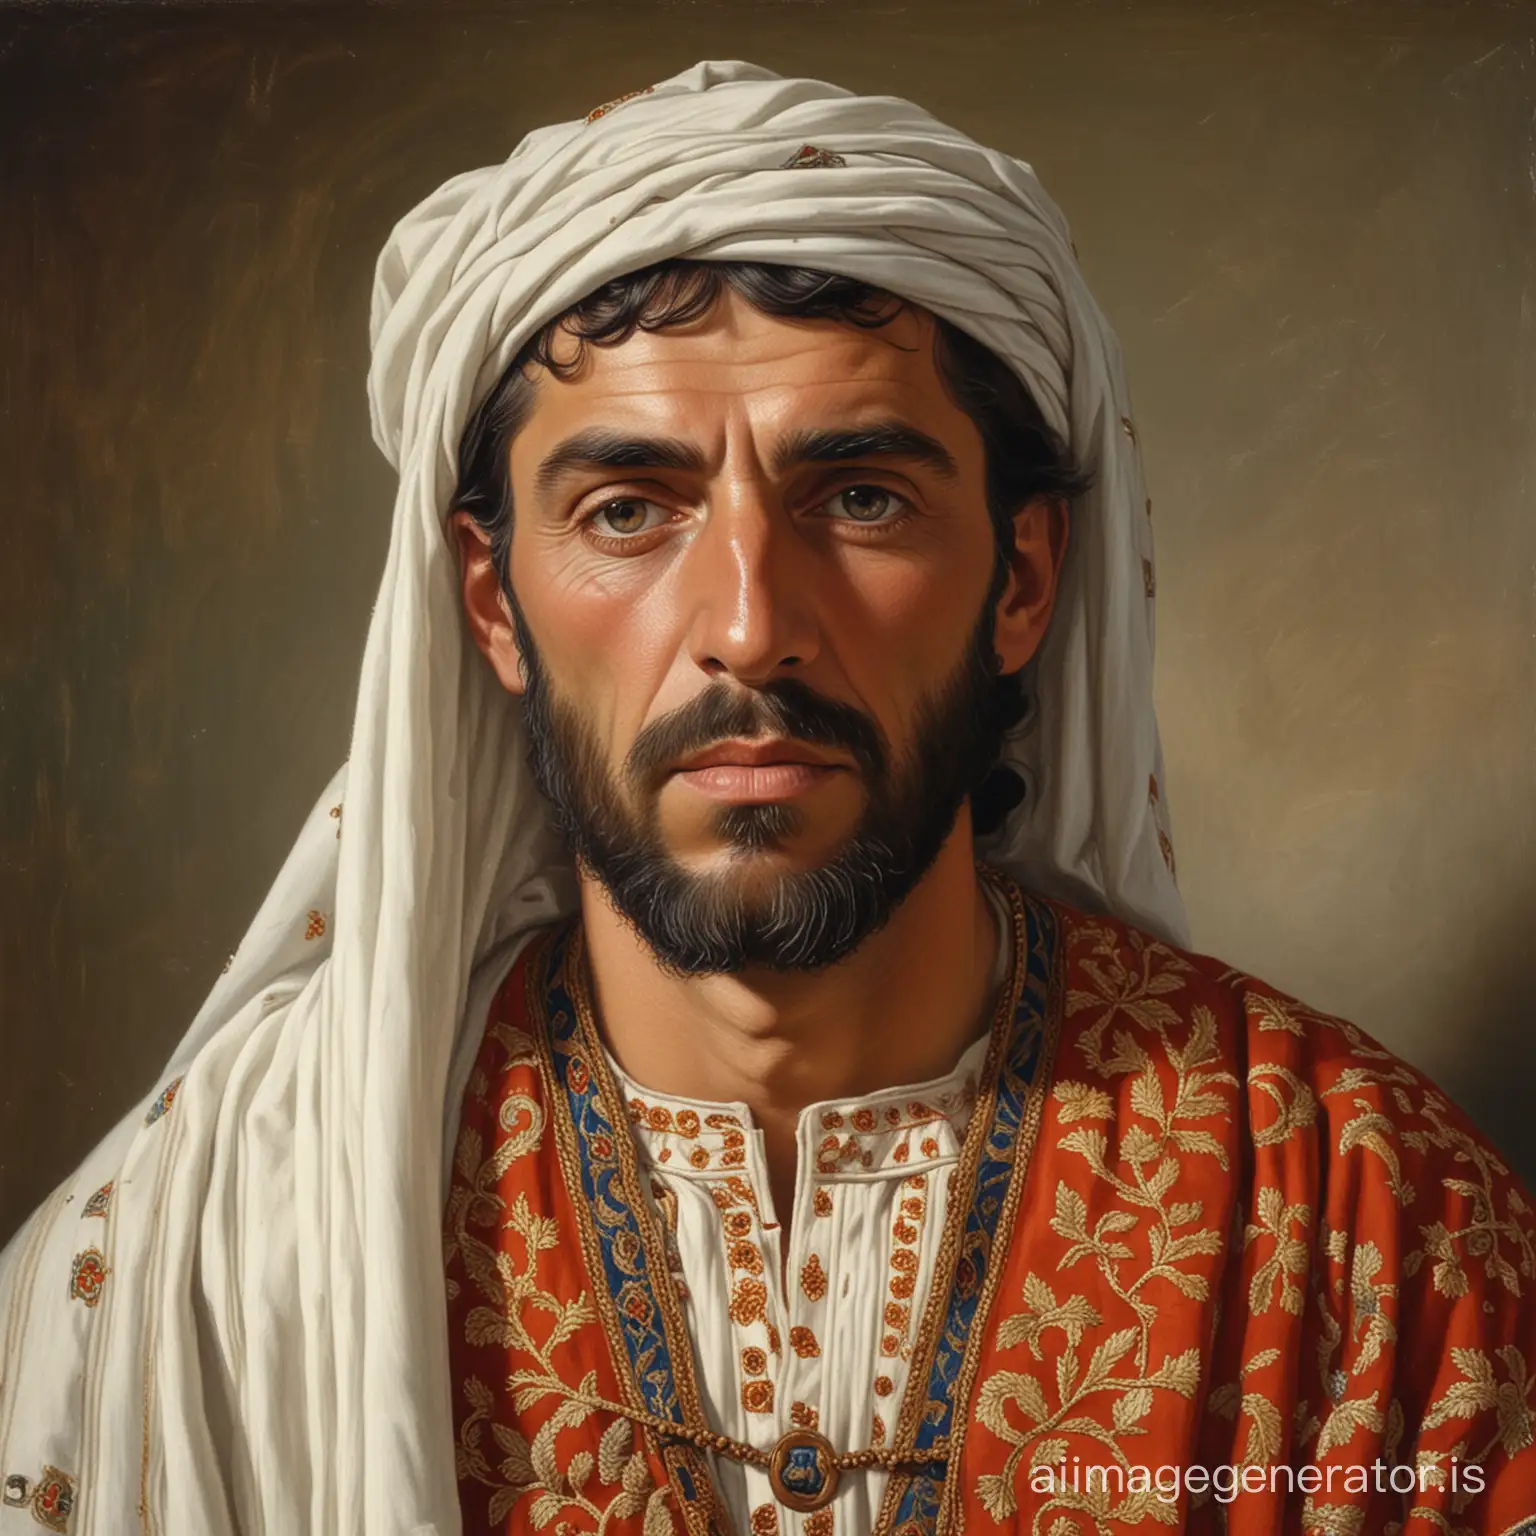 An oil portrait of an Italian man living in the 10th century wearing an embroided tunica